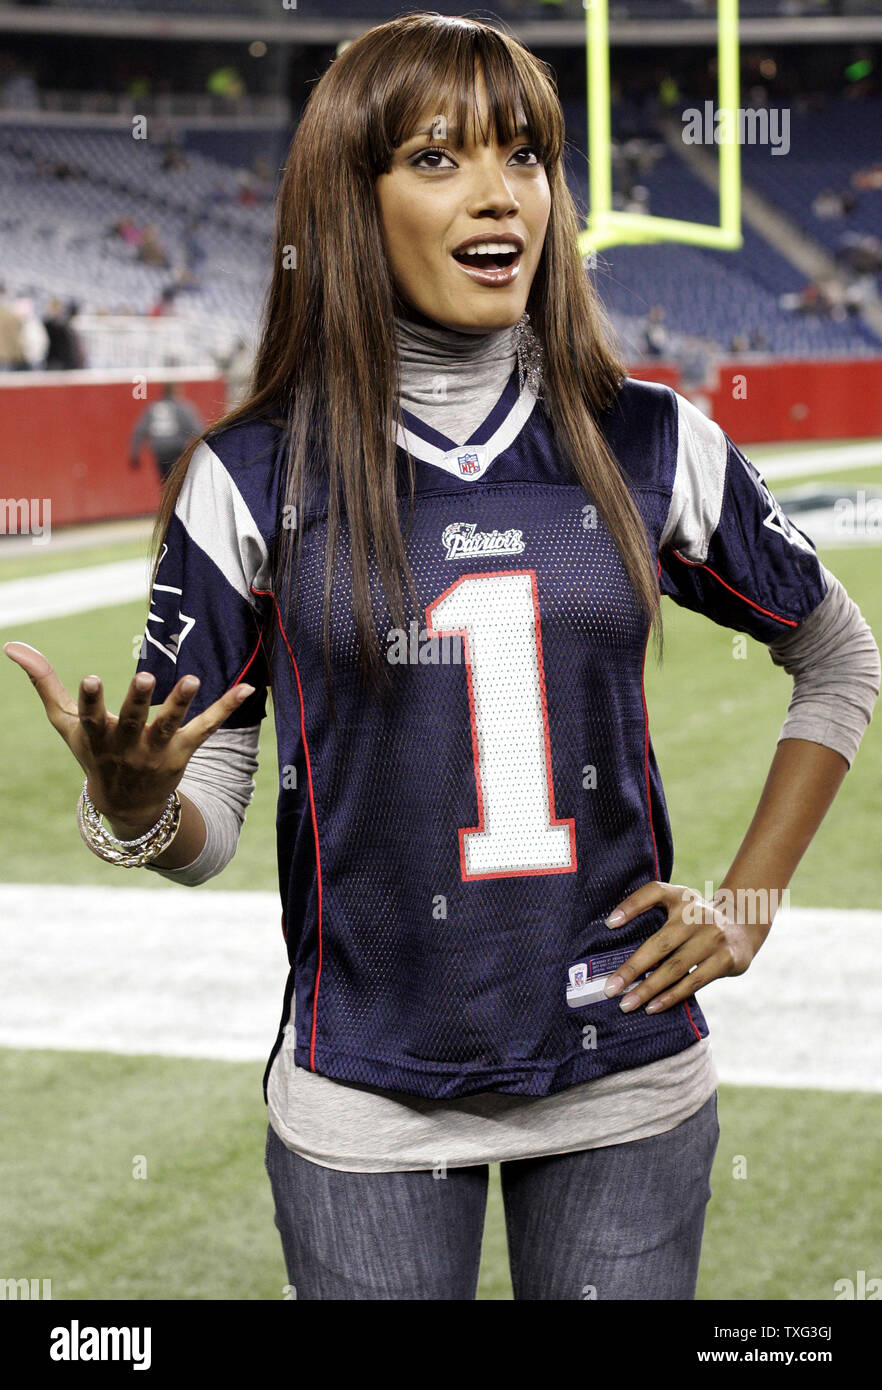 Victoria's Secret model Selita Ebanks chats with the media while wearing a New  England Patriots jersey before the game against the Philadelphia Eagles at  Gillette Stadium in Foxboro, Massachusetts on November 25,